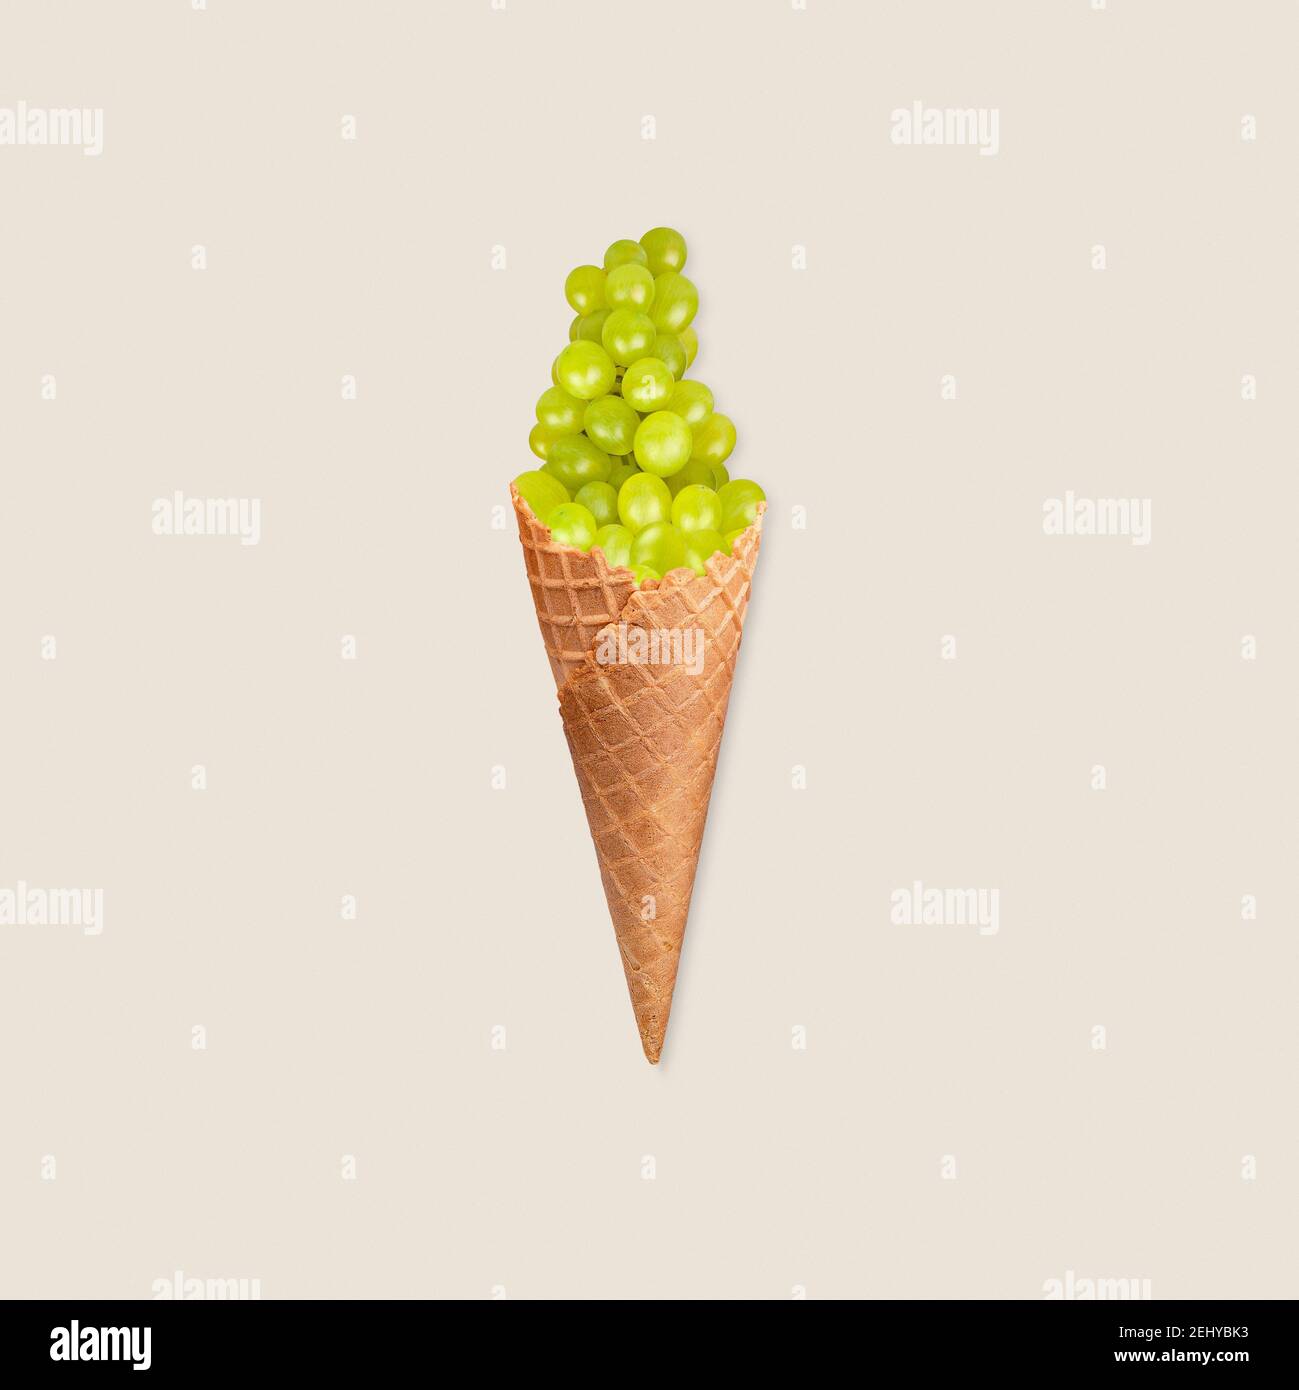 Healthy eating concept with green grape ice cream photo manipulation on pastel background Stock Photo